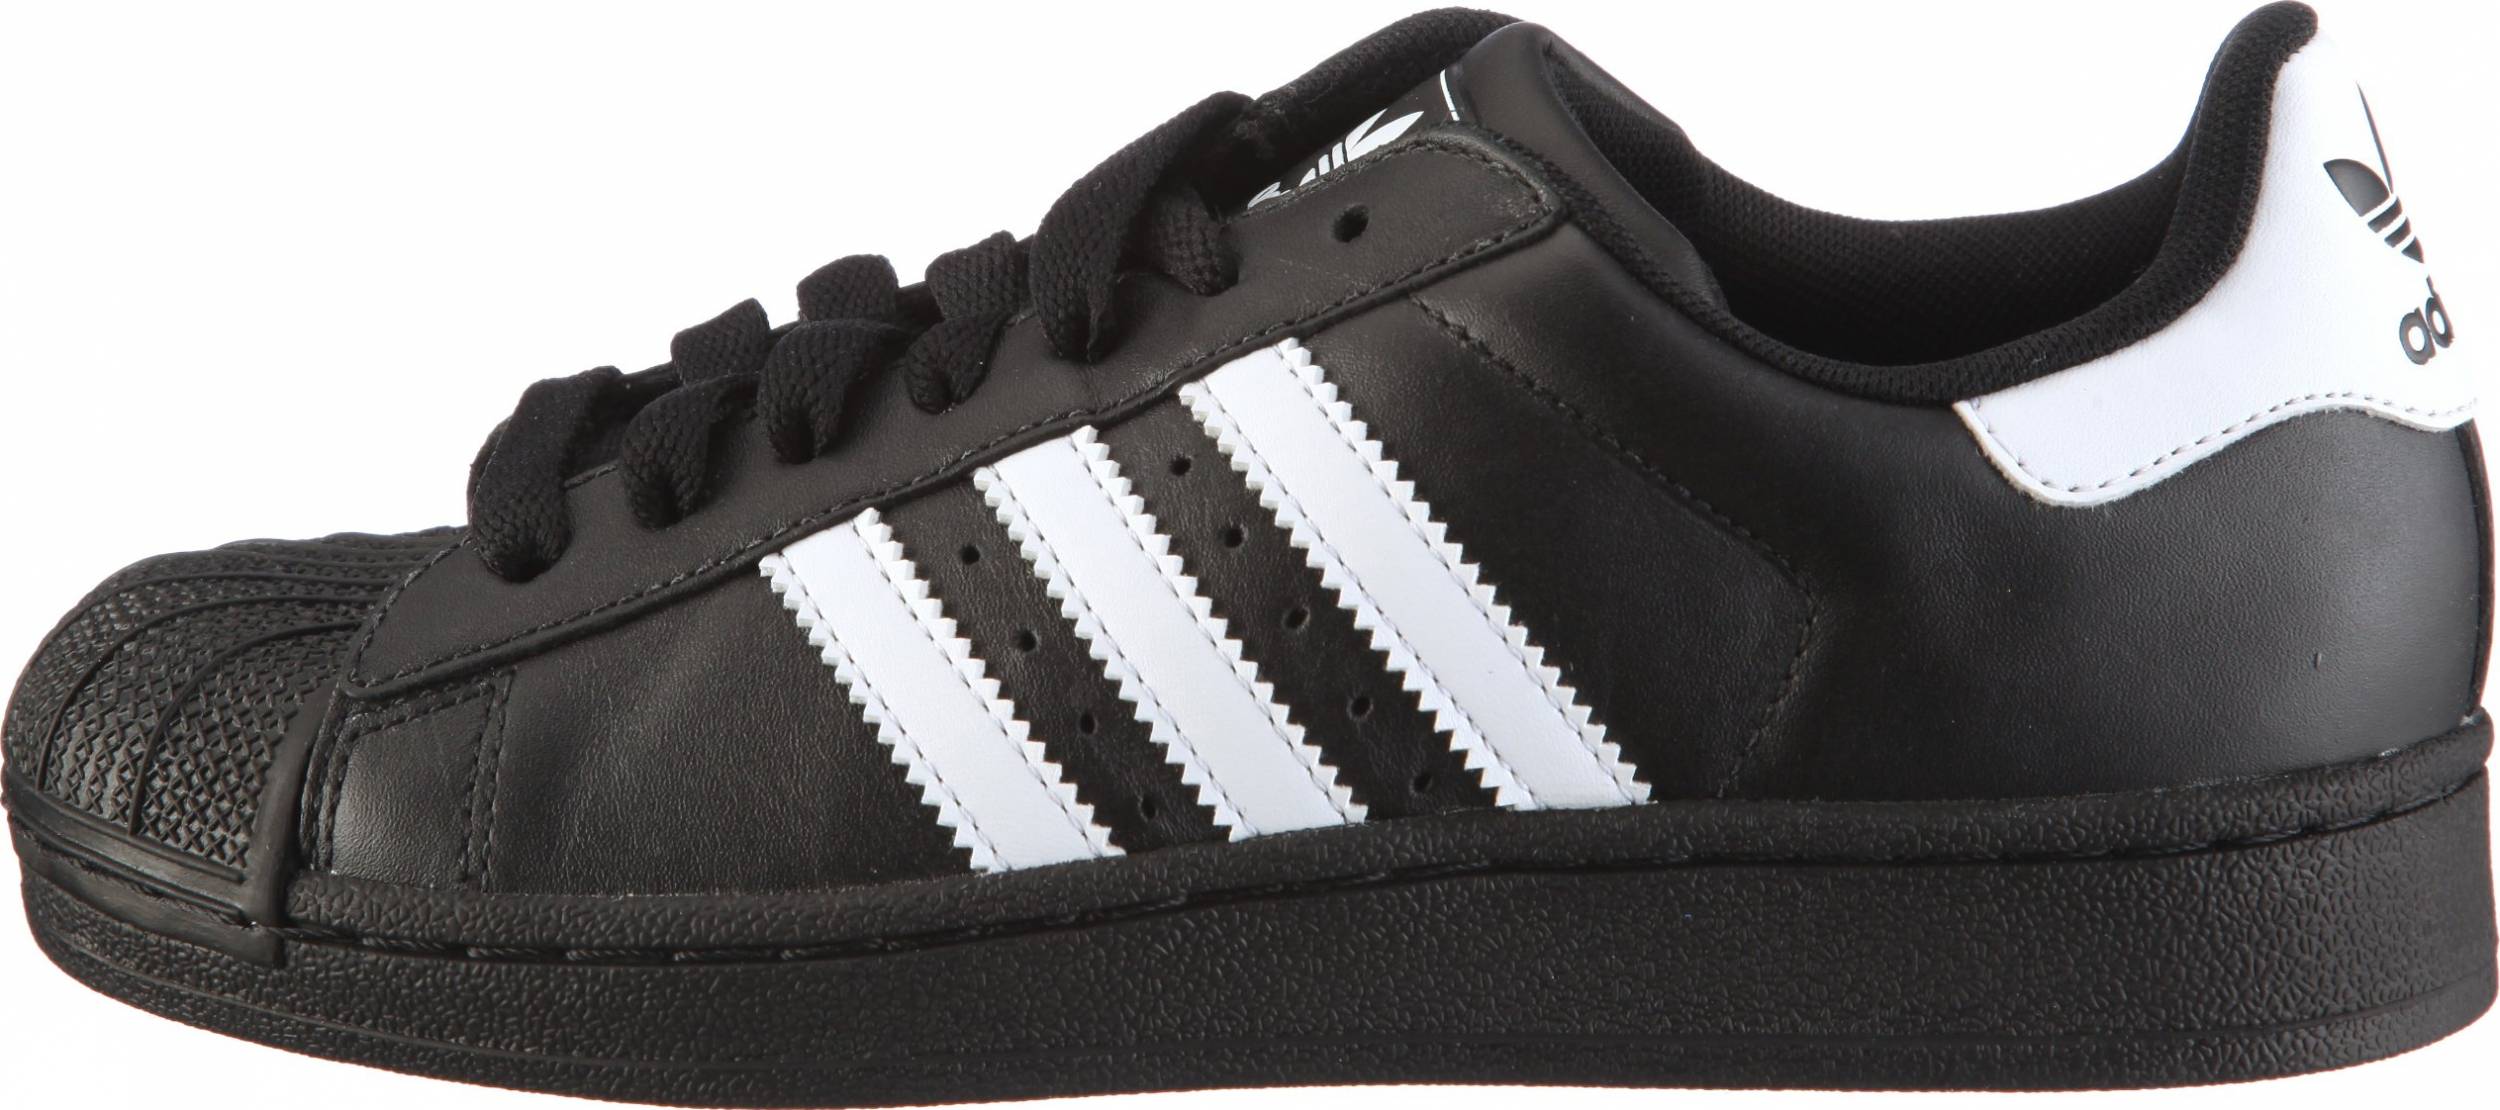 Only $55 + Review of Adidas Superstar 2 